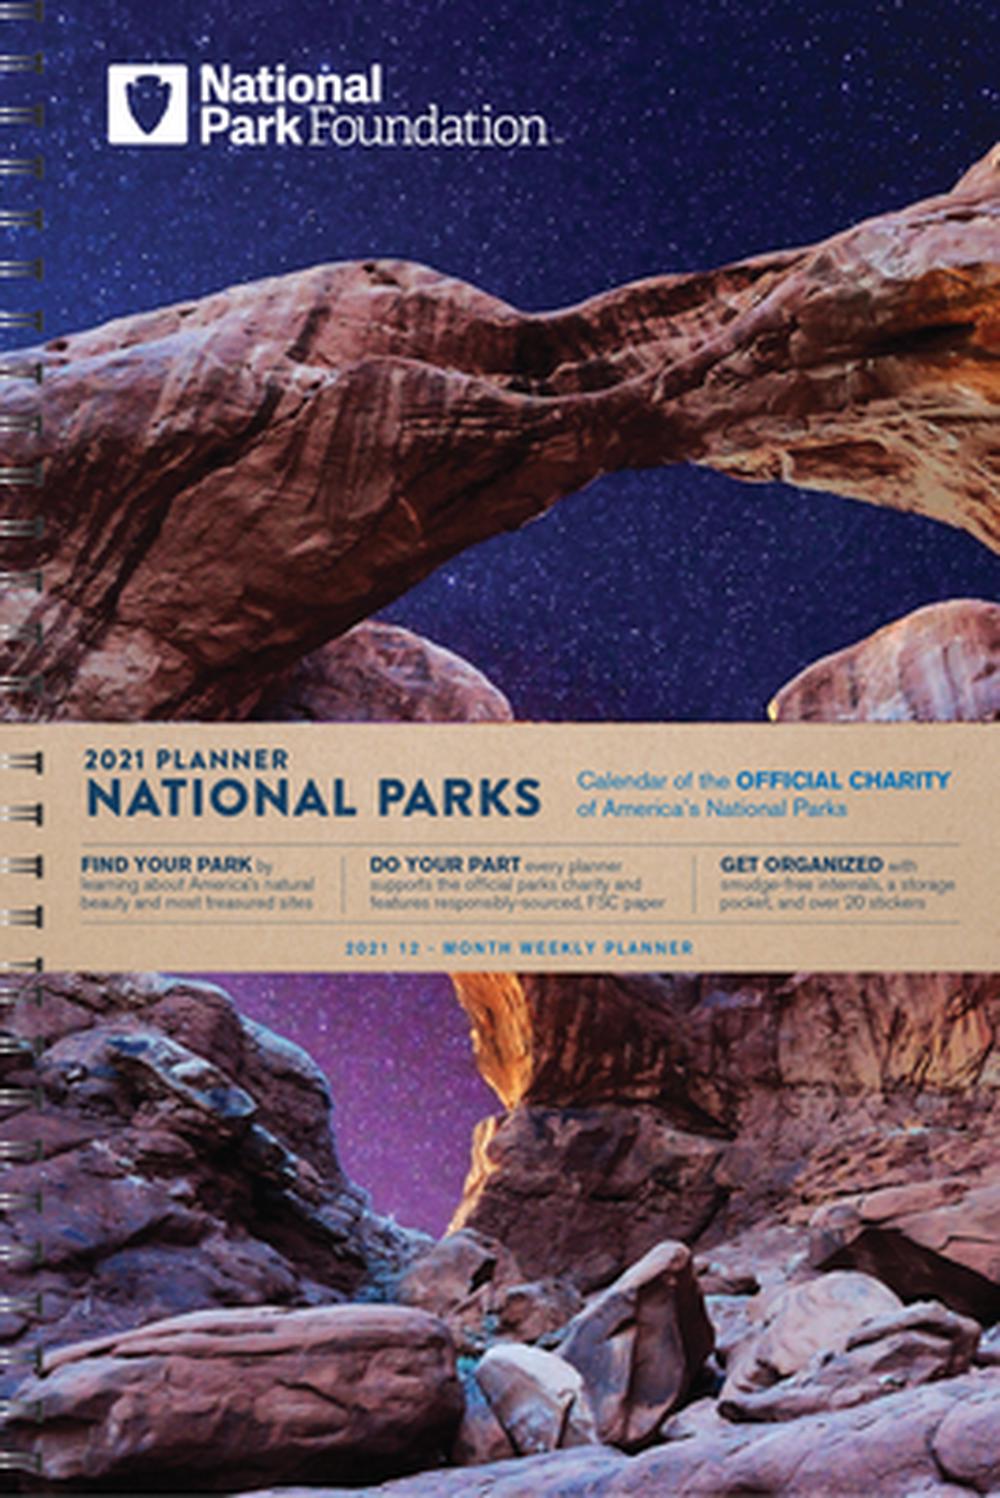 national-park-foundation-2021-planner-by-national-park-foundation-free-shipping-9781728216263